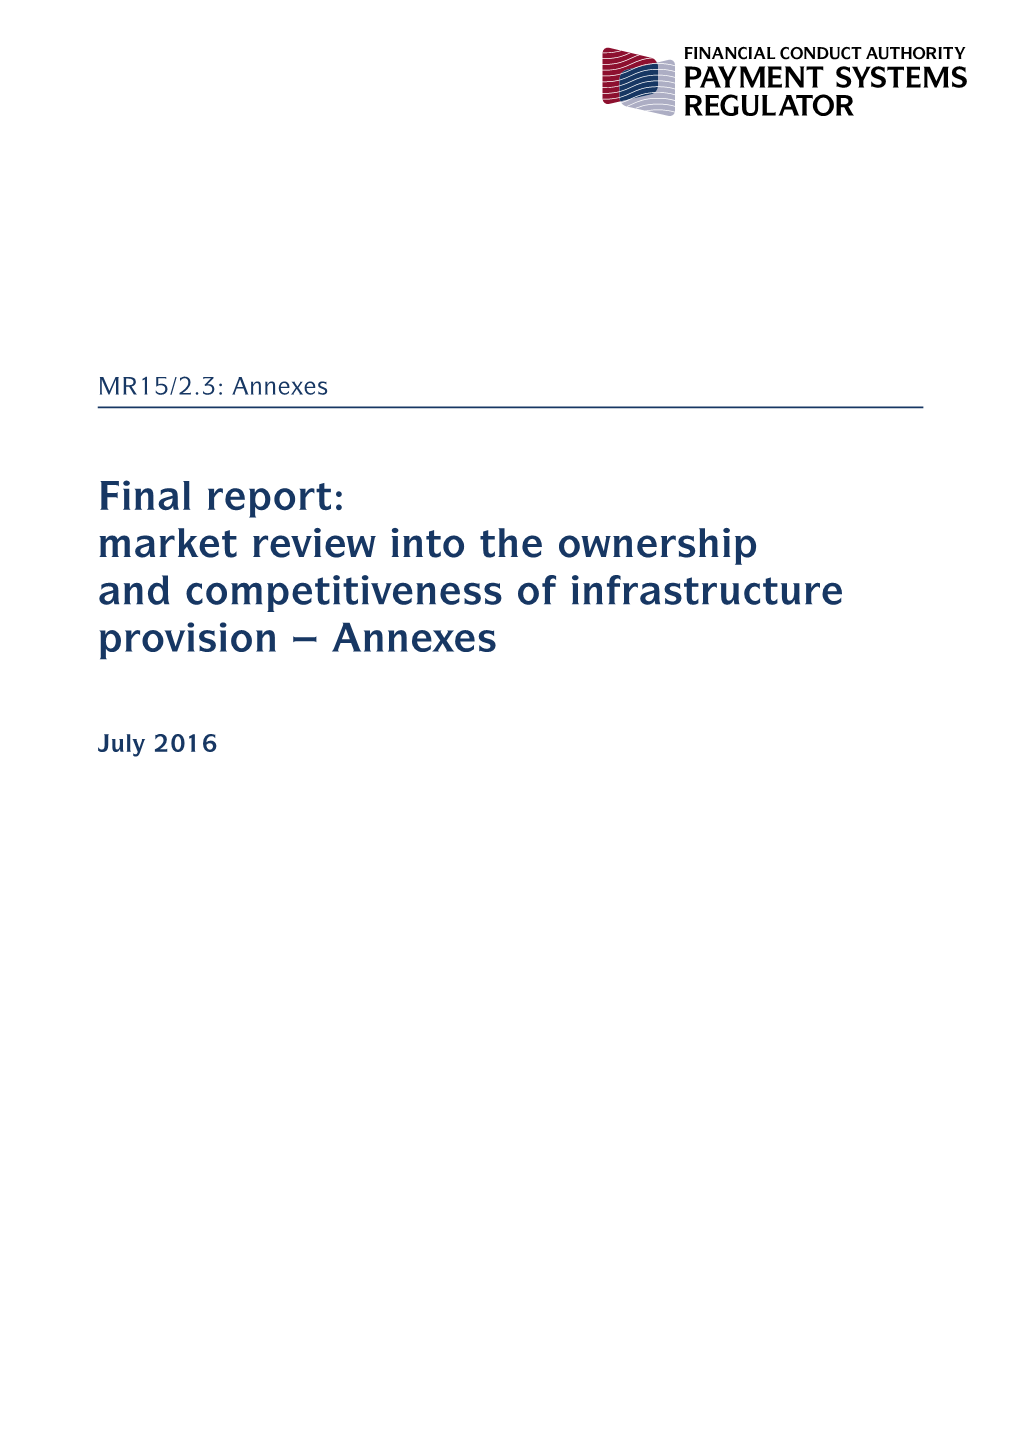 Final Report: Market Review Into the Ownership and Competitiveness of Infrastructure Provision – Annexes